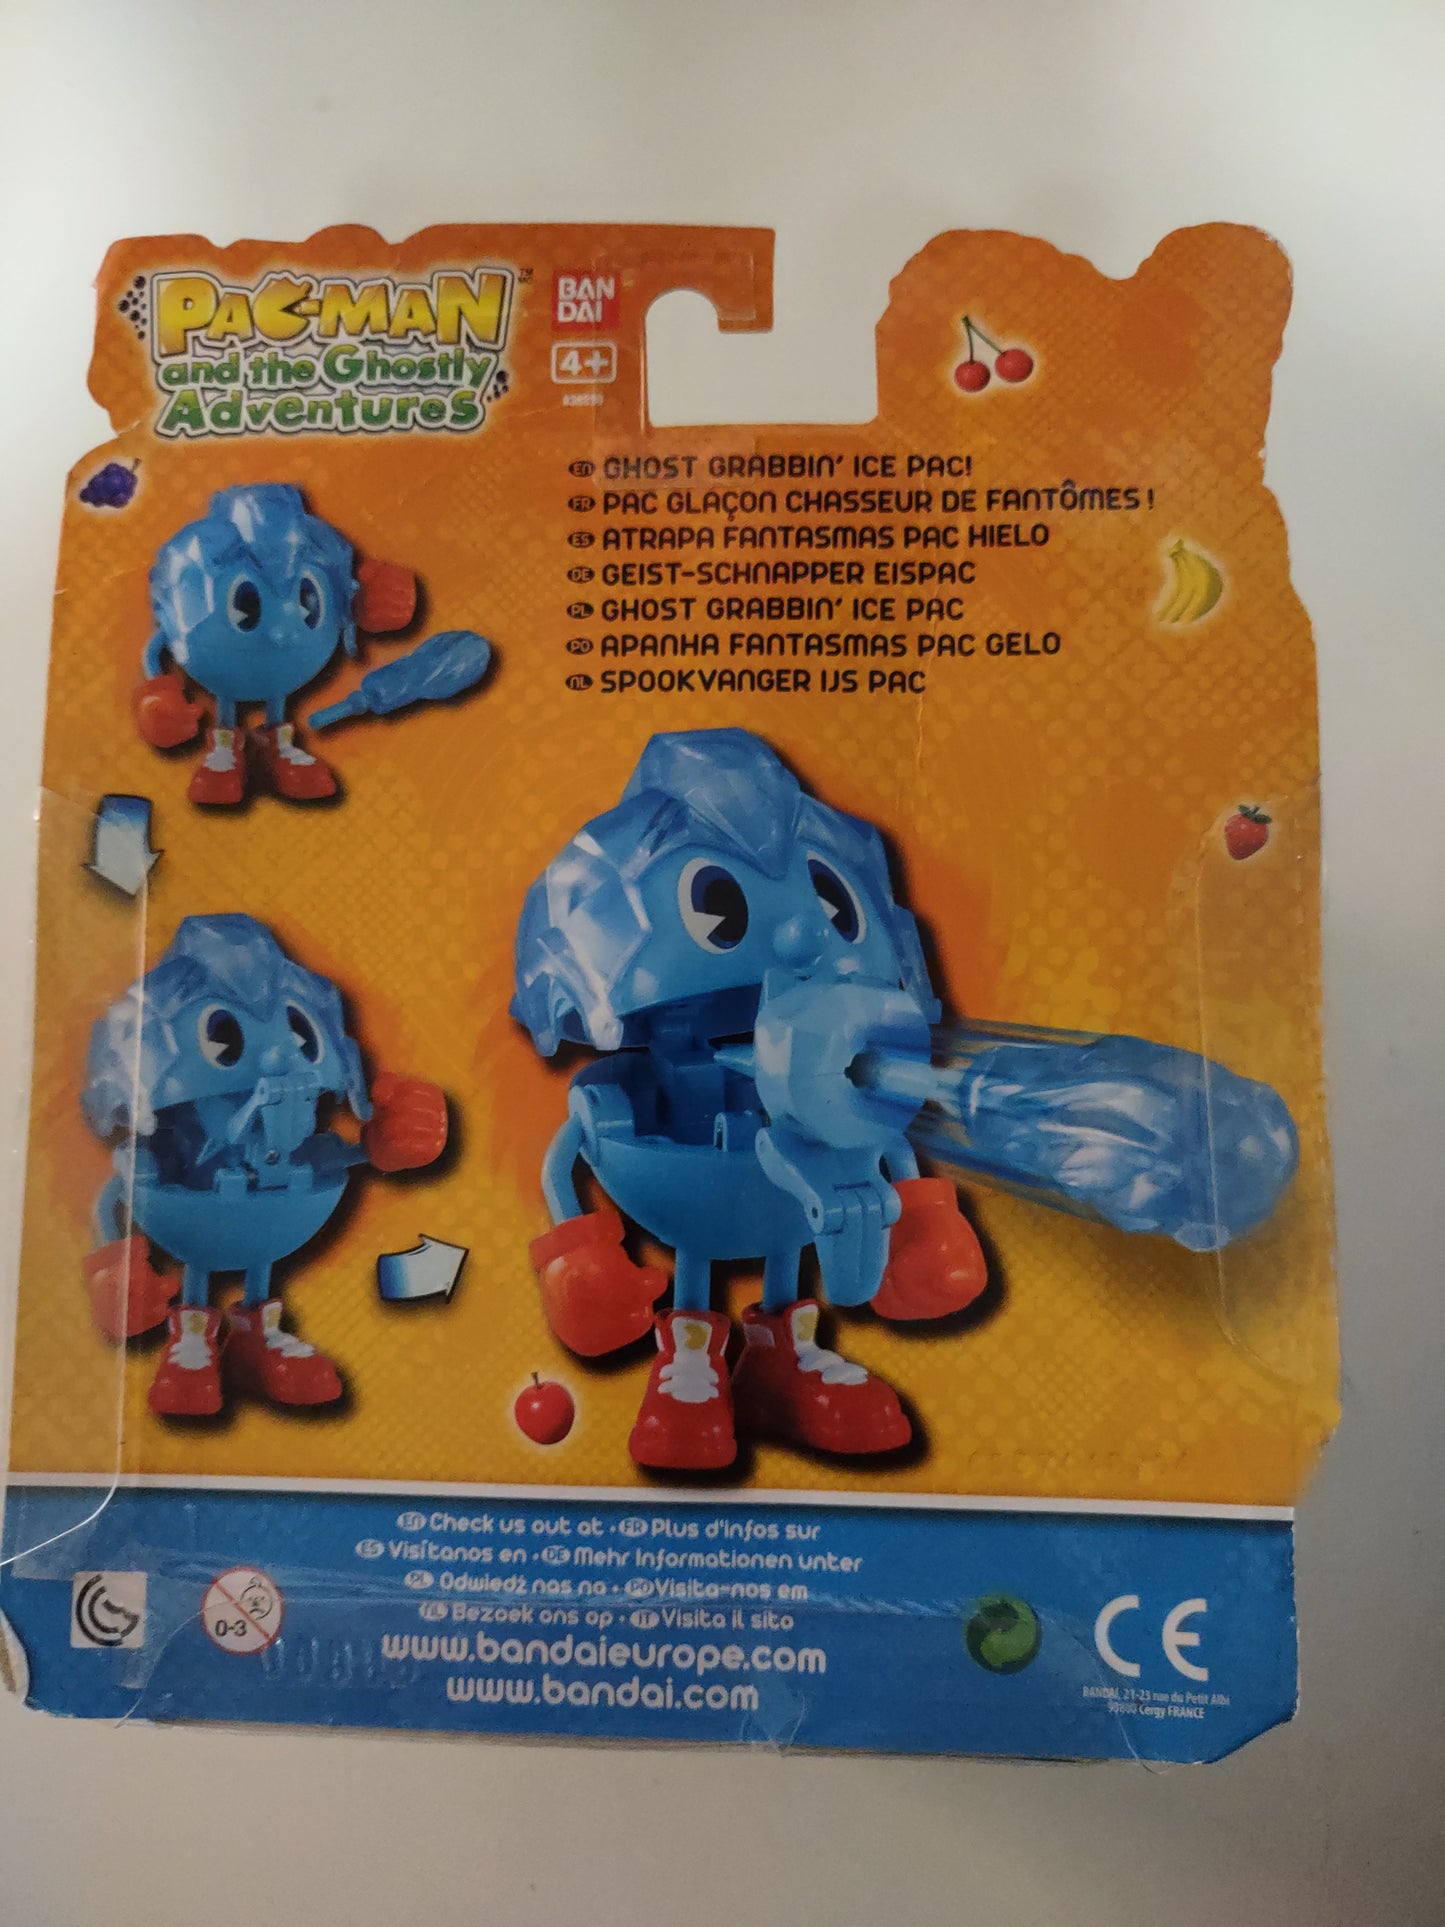 Action figures pac-man and the ghostly adventures ICE pac